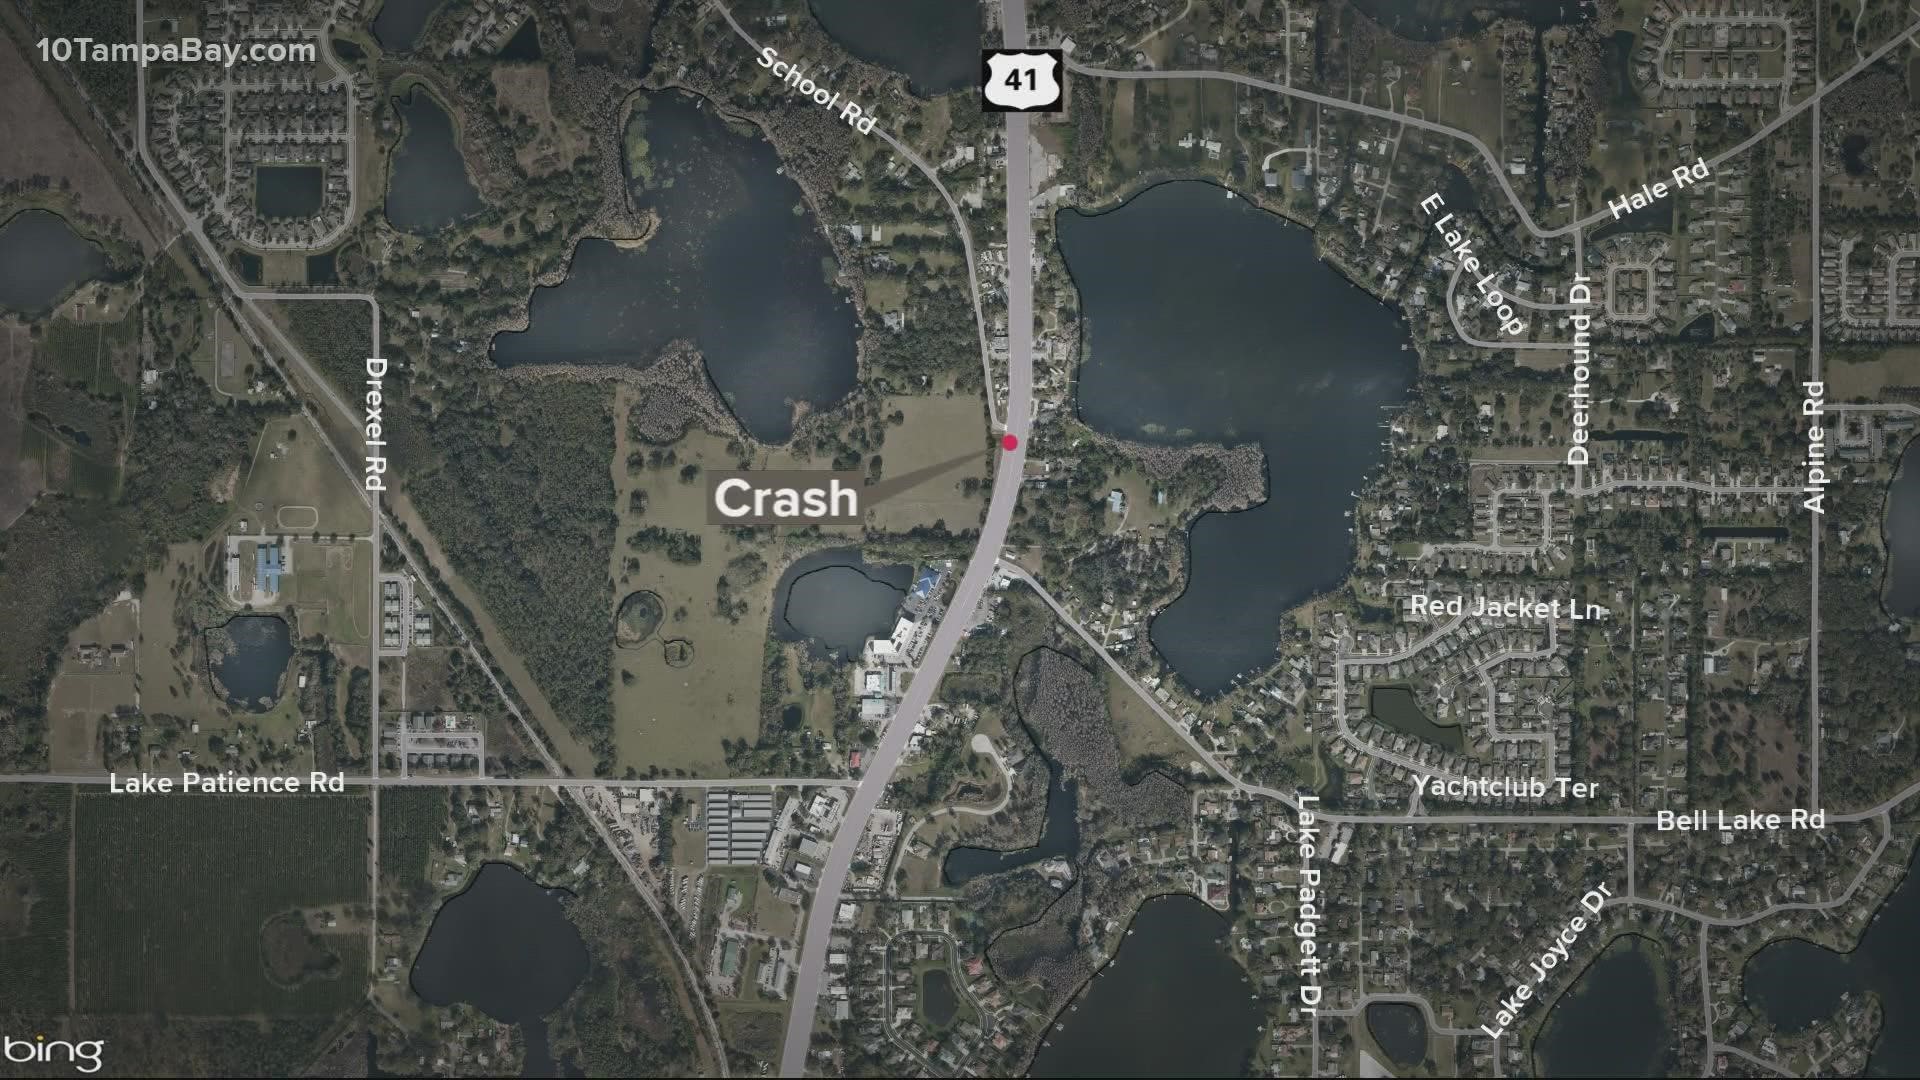 Troopers say the crash happened just before 7 p.m. on U.S. 41 north of School Road in Pasco County.